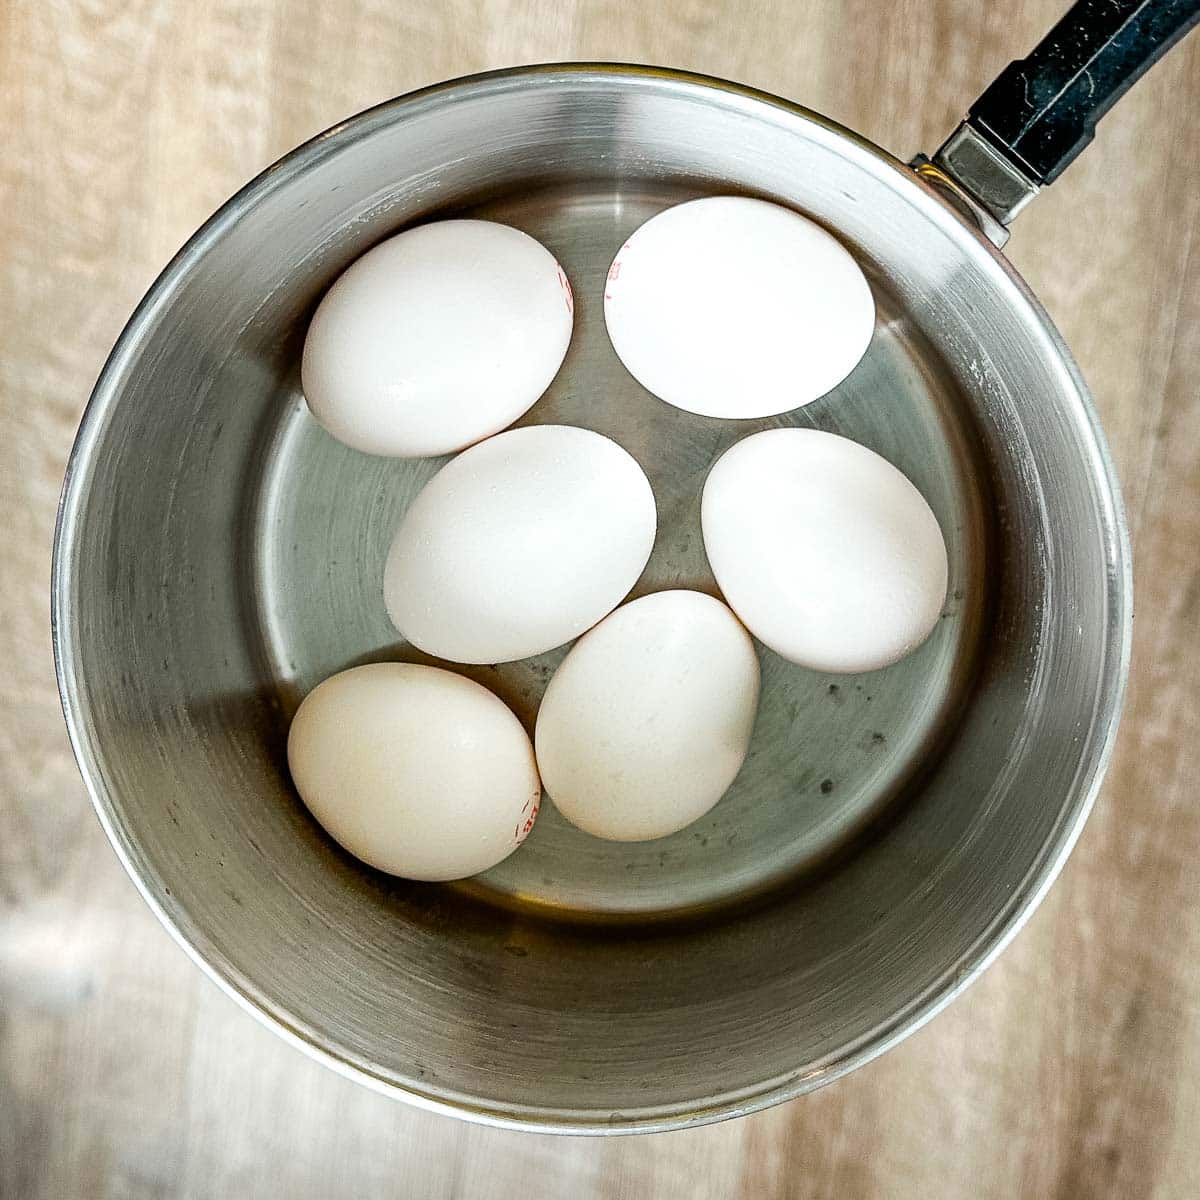 eggs in a stainless steel pot.